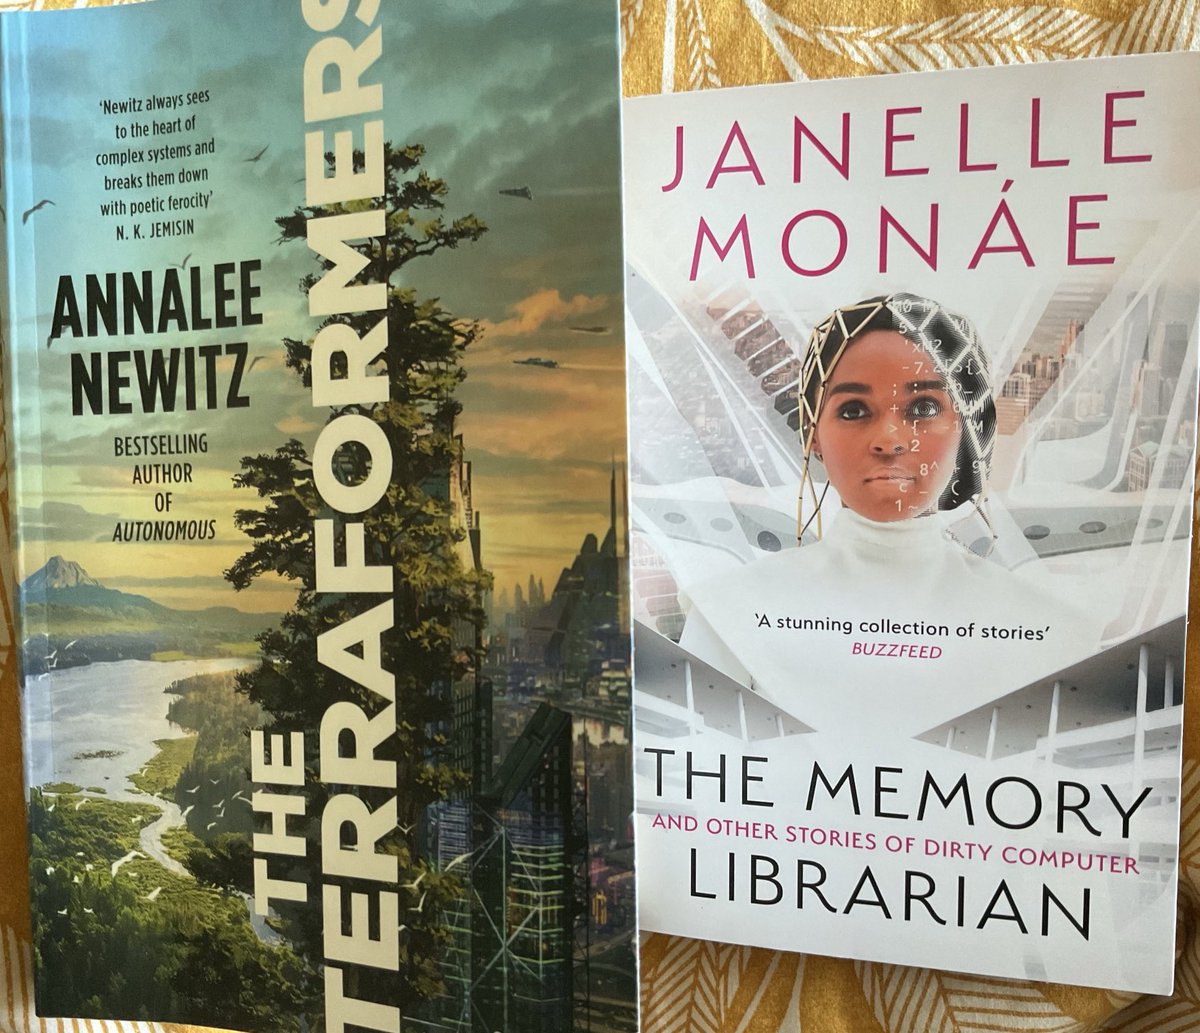 Enjoying these: The Terraformers, Annálee Newitz and The Memory Librarian, Janelle Monáe.